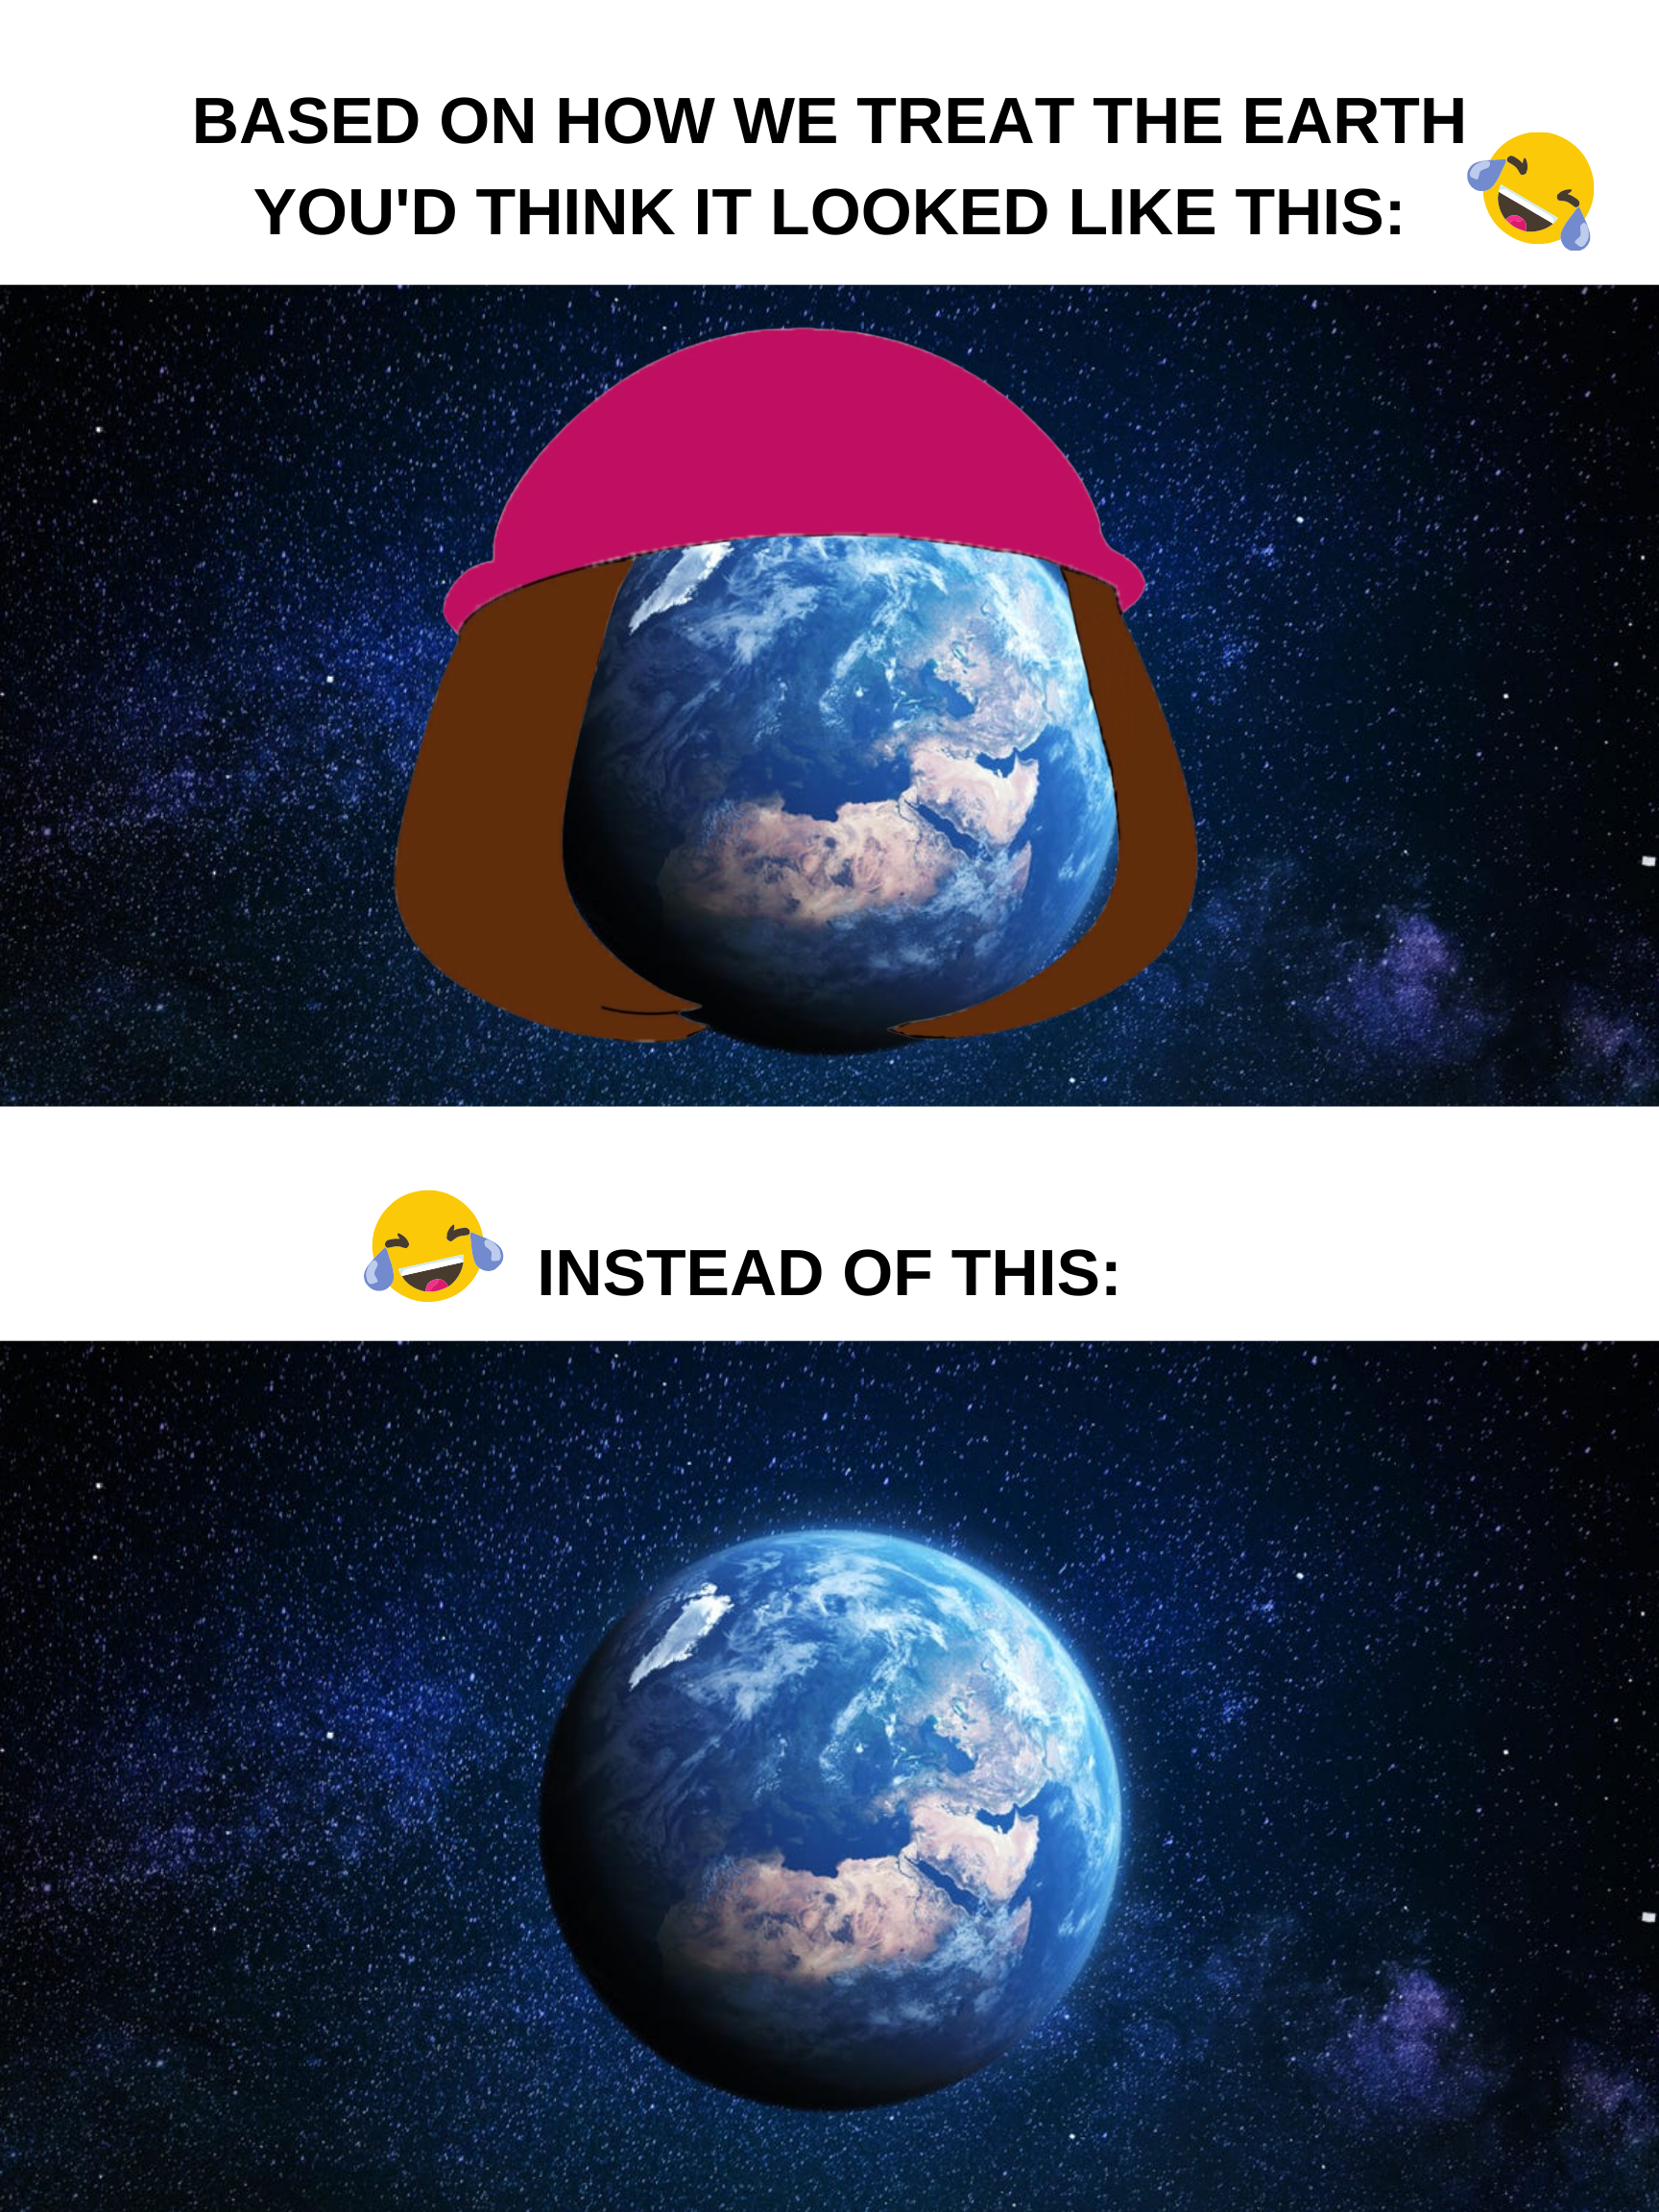 Two images of Earth. One with a hat and hair and the other regular. The caption says "based on how we treat the Earth you'd think it looked like this, instead of this"